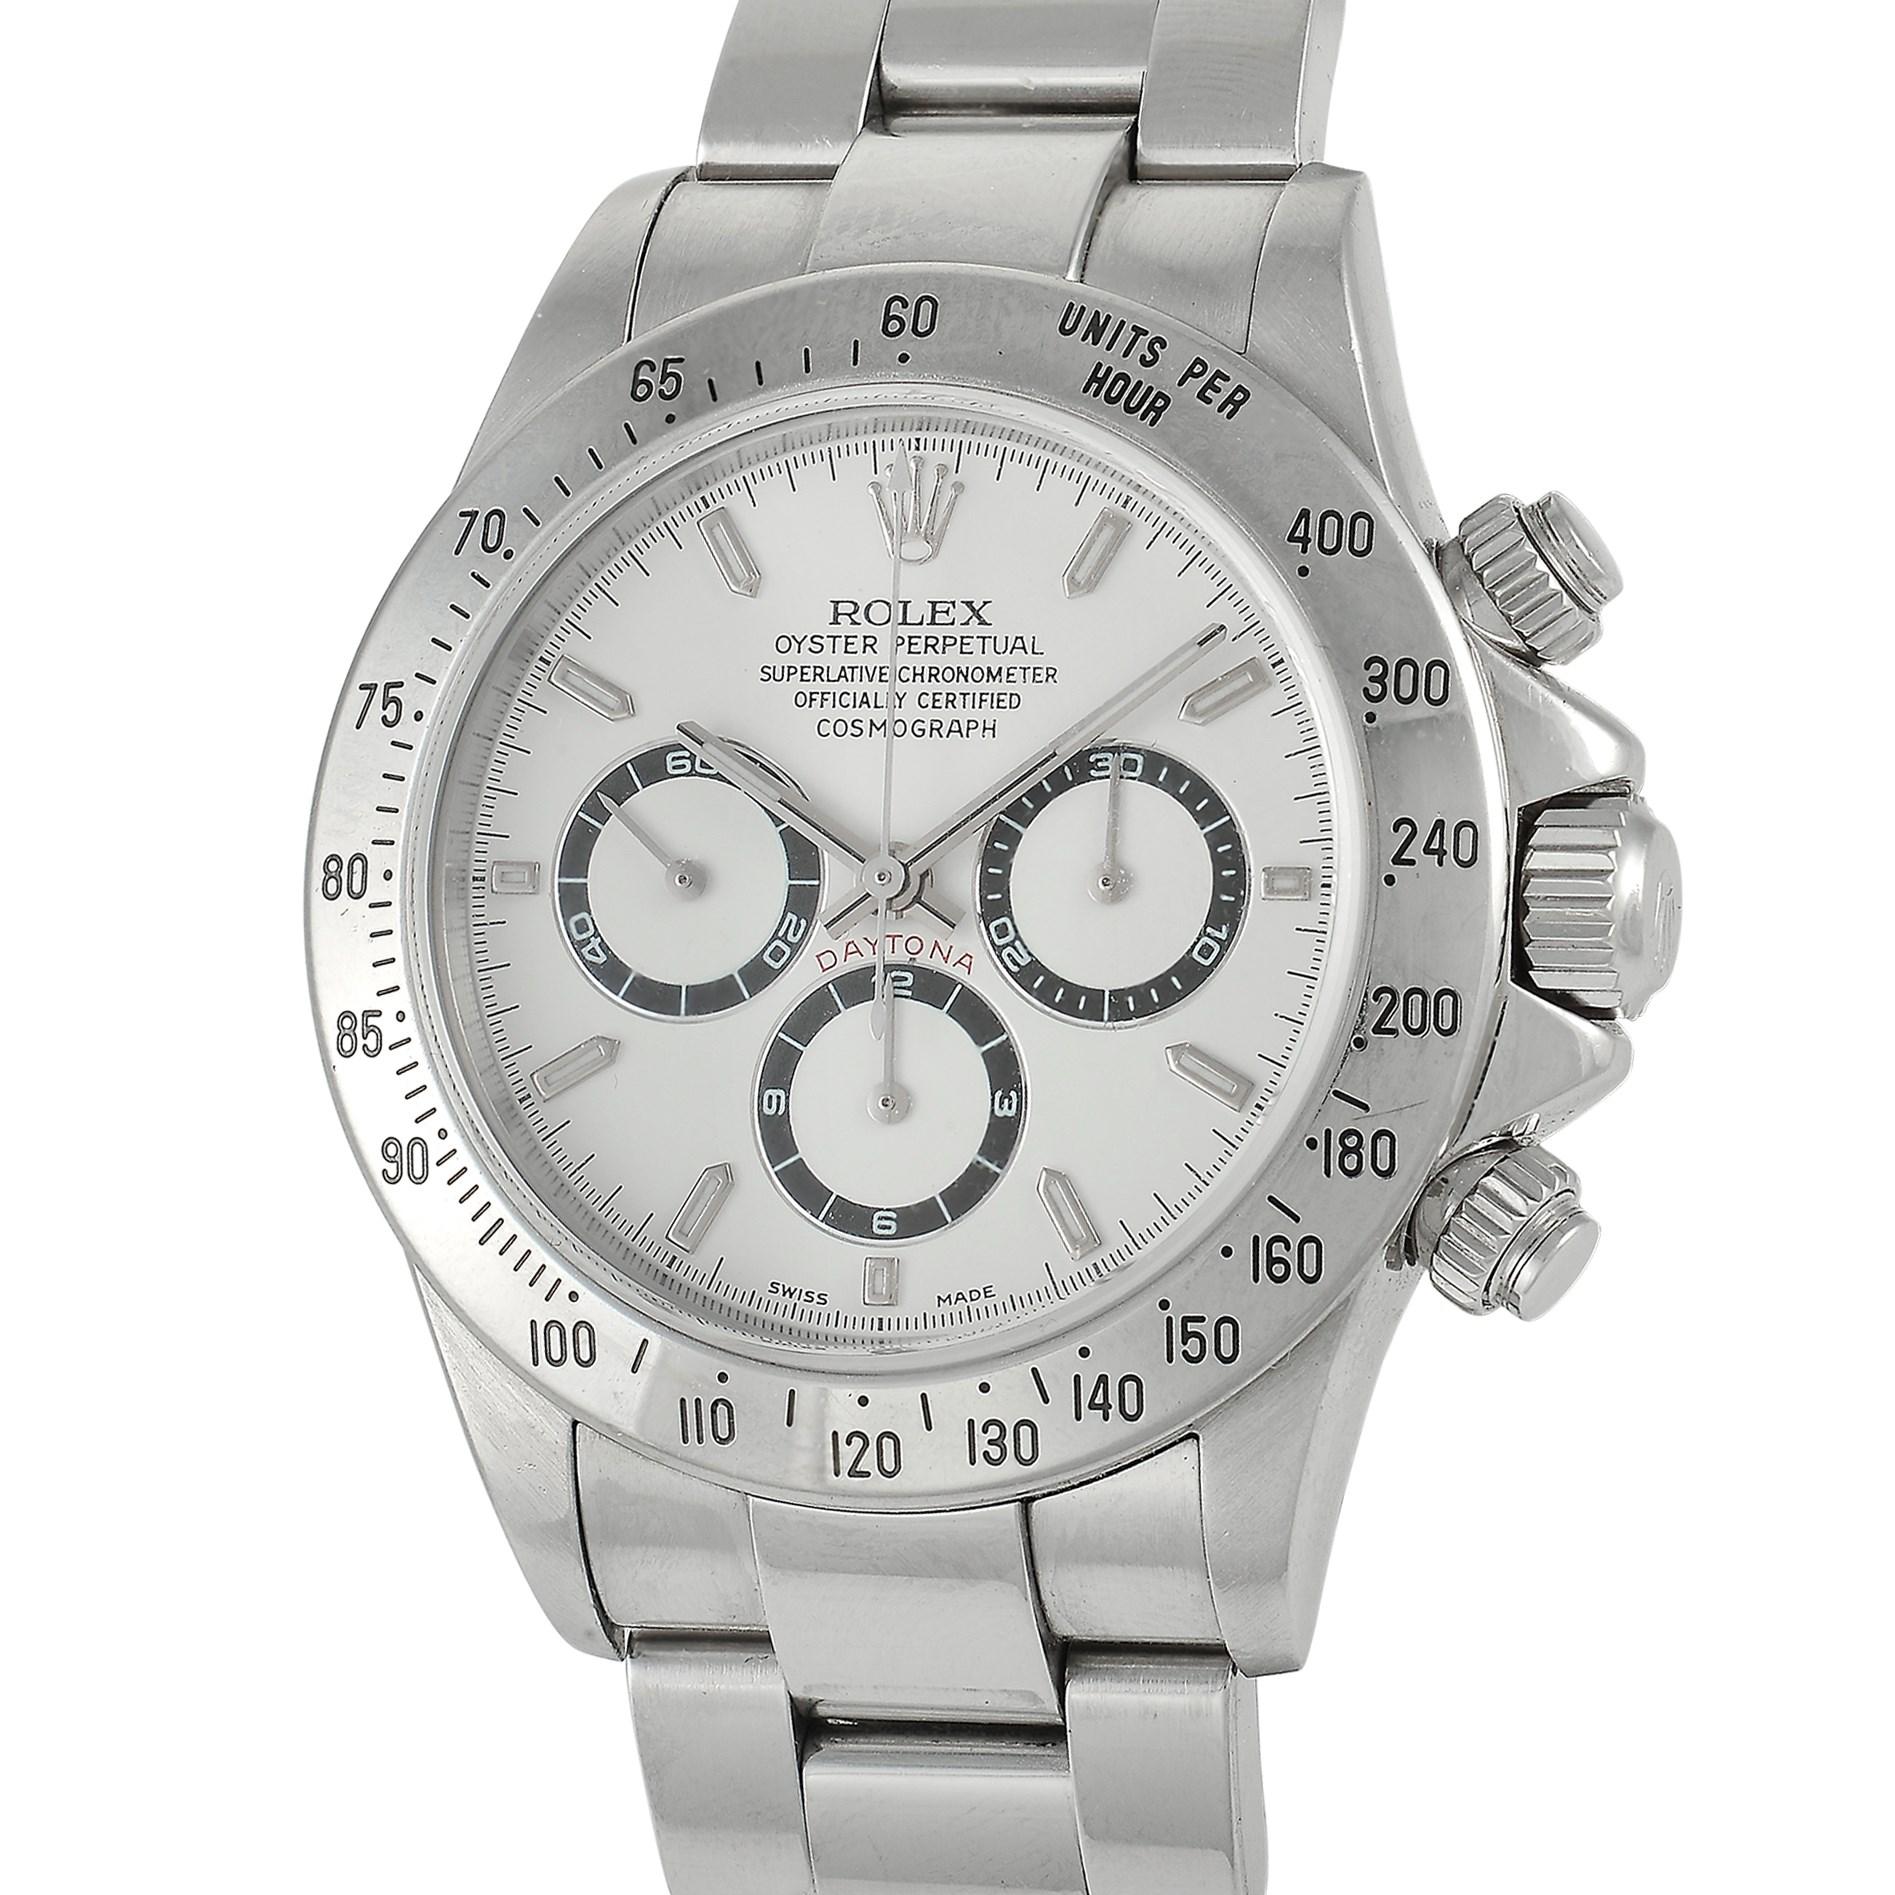 The Rolex Cosmograph Daytona Watch, reference number 16520, is a luxury timepiece that upholds the brand’s commitment to excellence.

Sleek and stylish, this watch features a 40mm case, bracelet, and fixed tachymeter engraved bezel made from